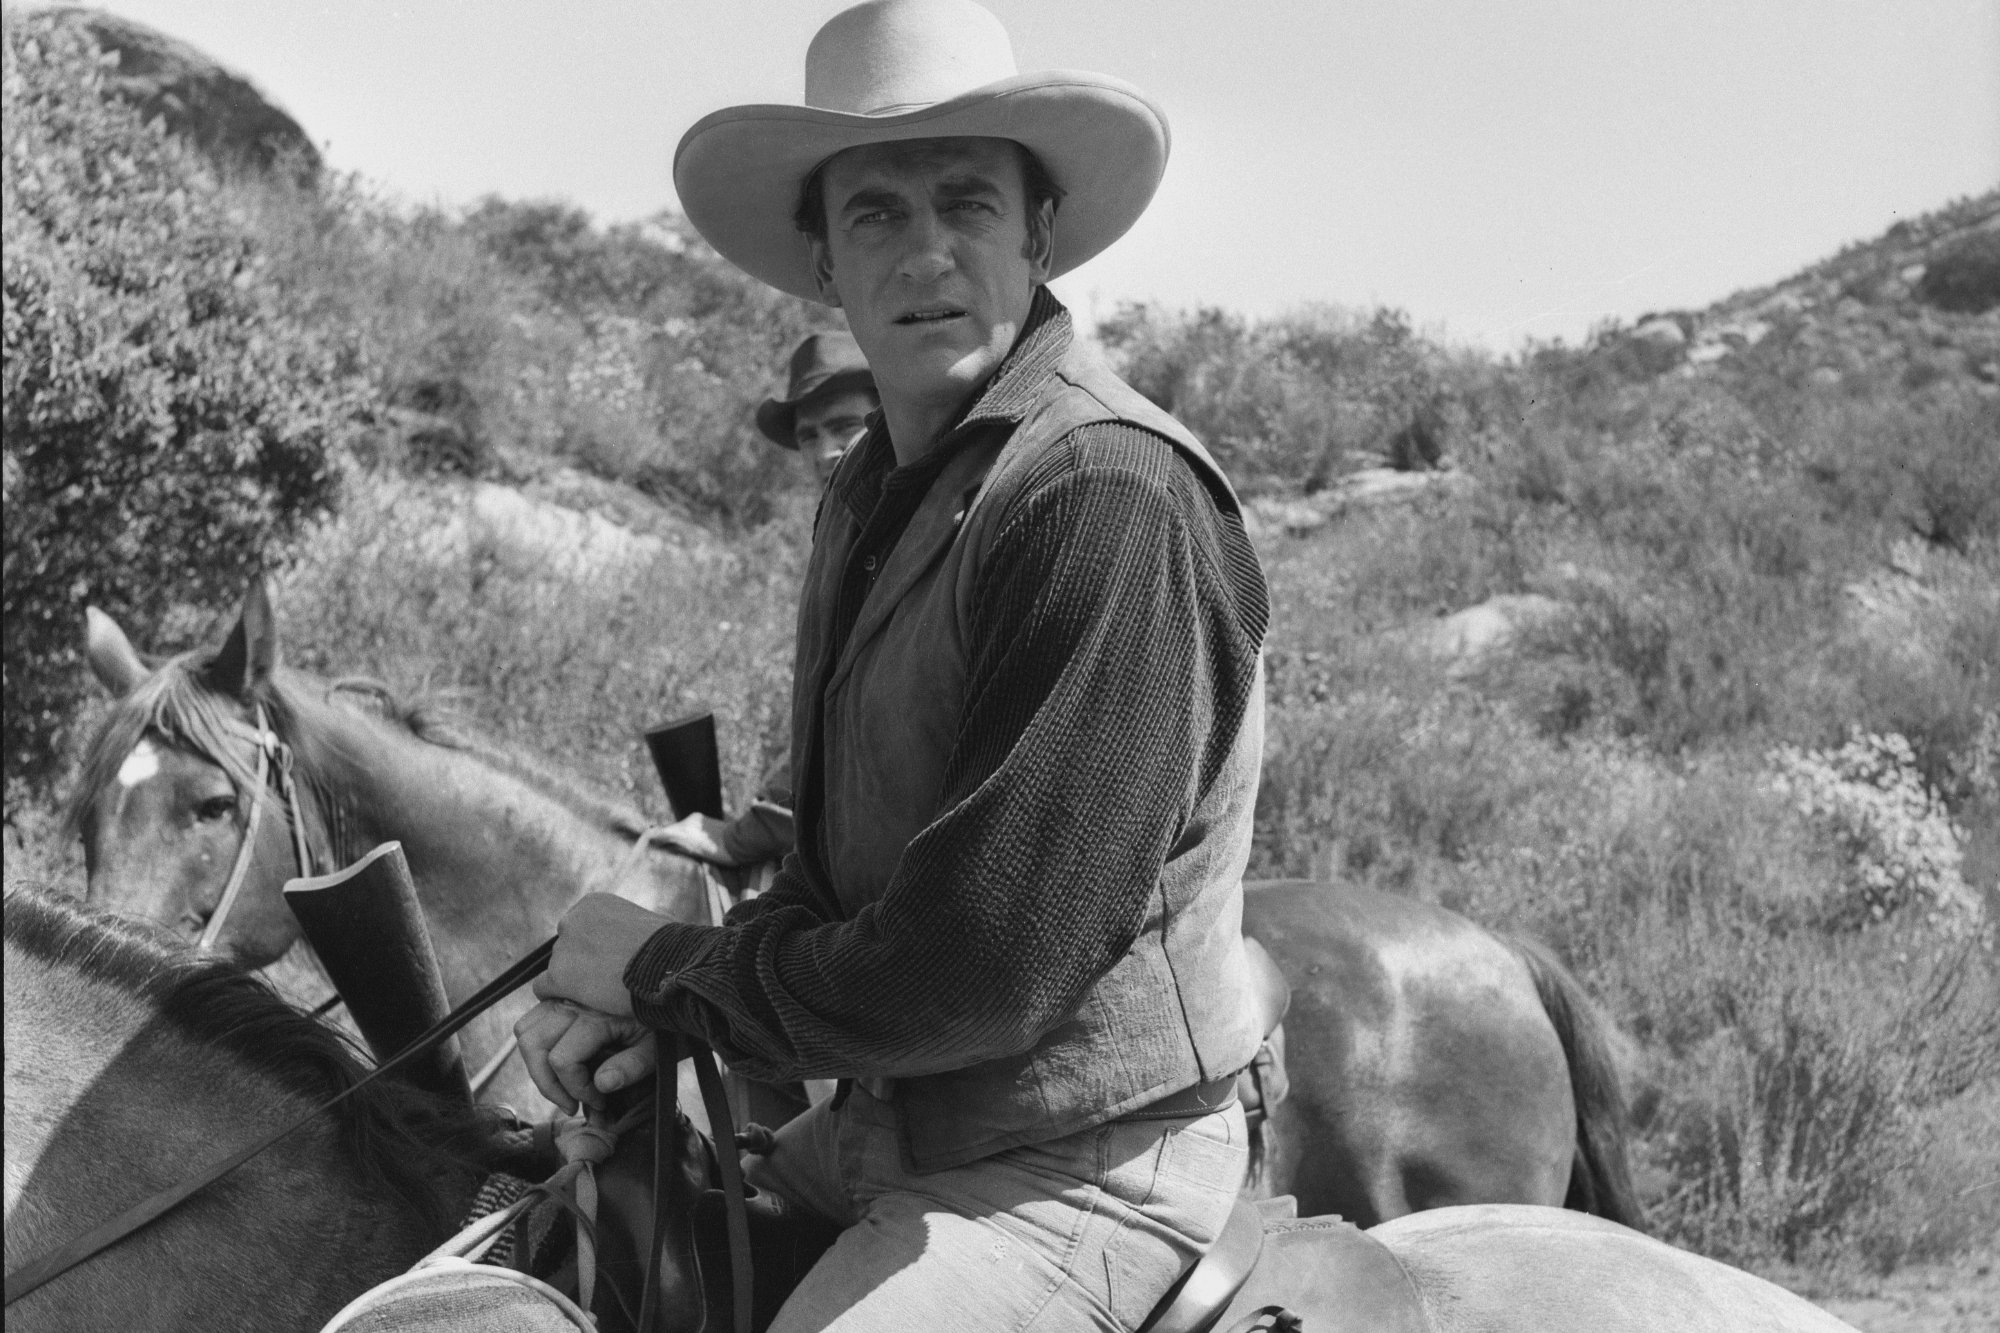 'Gunsmoke' James Arness as U.S. Marshal Matt Dillon in a black-and-white picture on horseback, looking over his shoulder